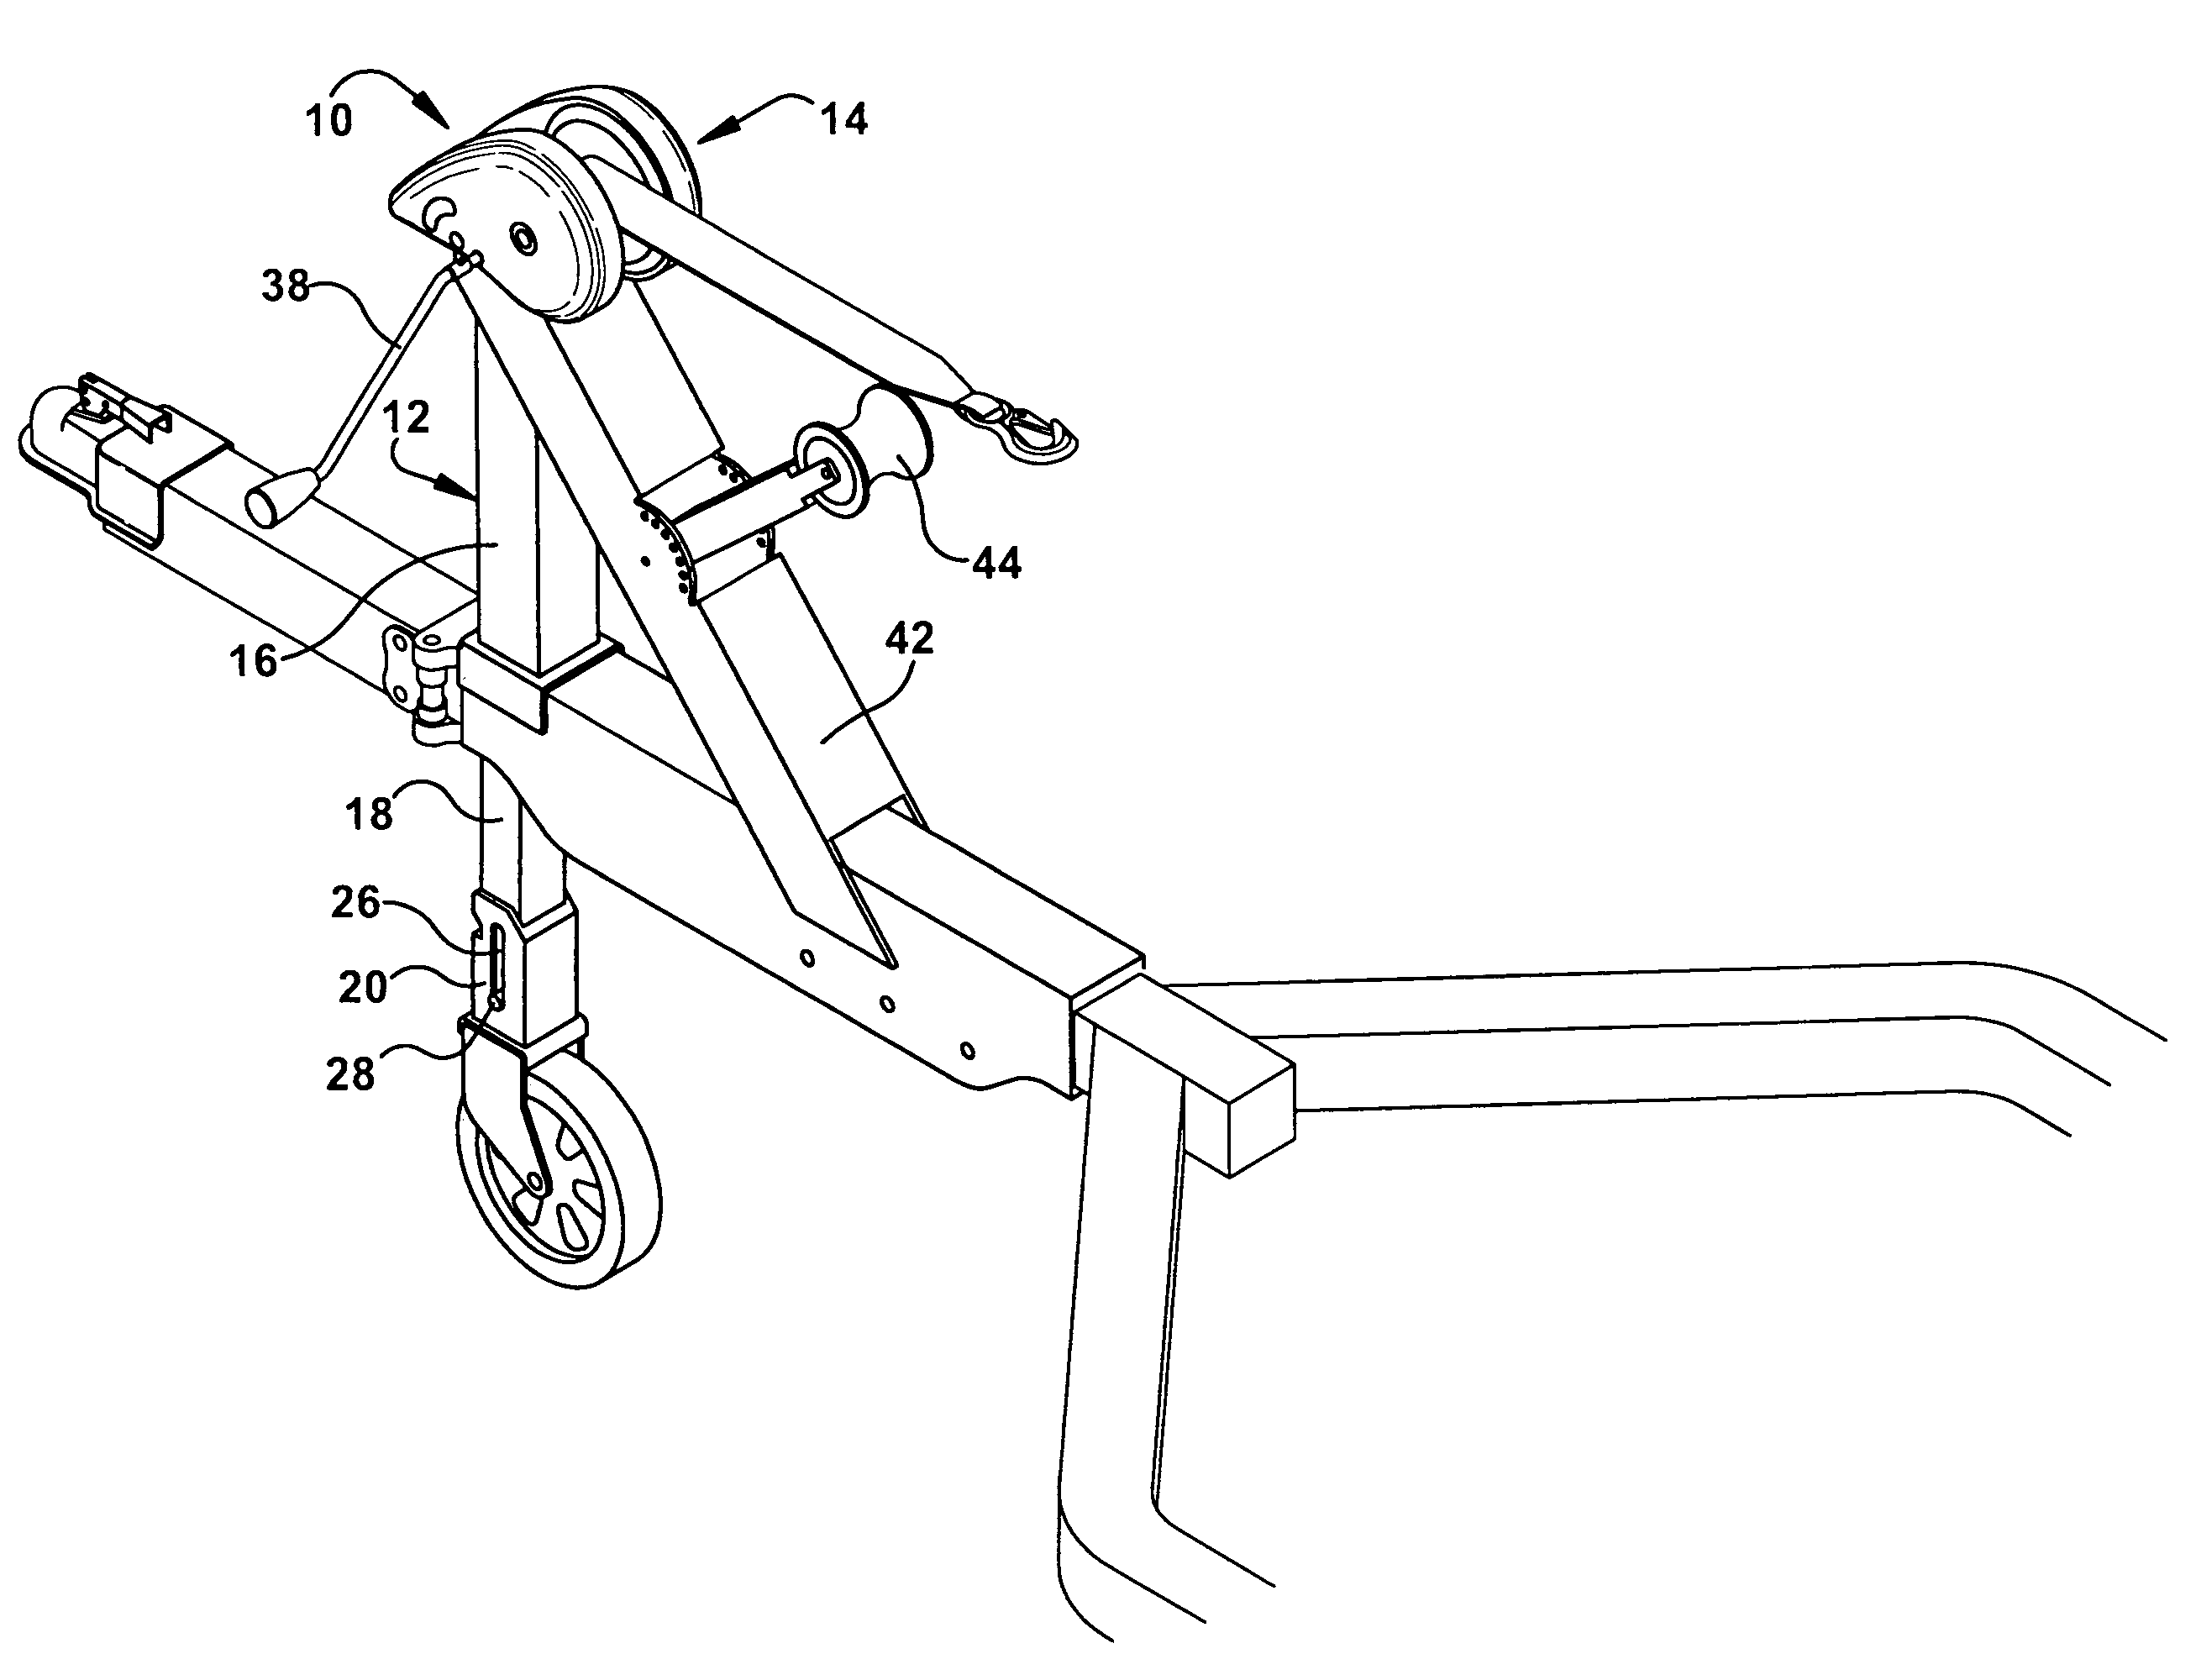 Integrated jack and winch assembly